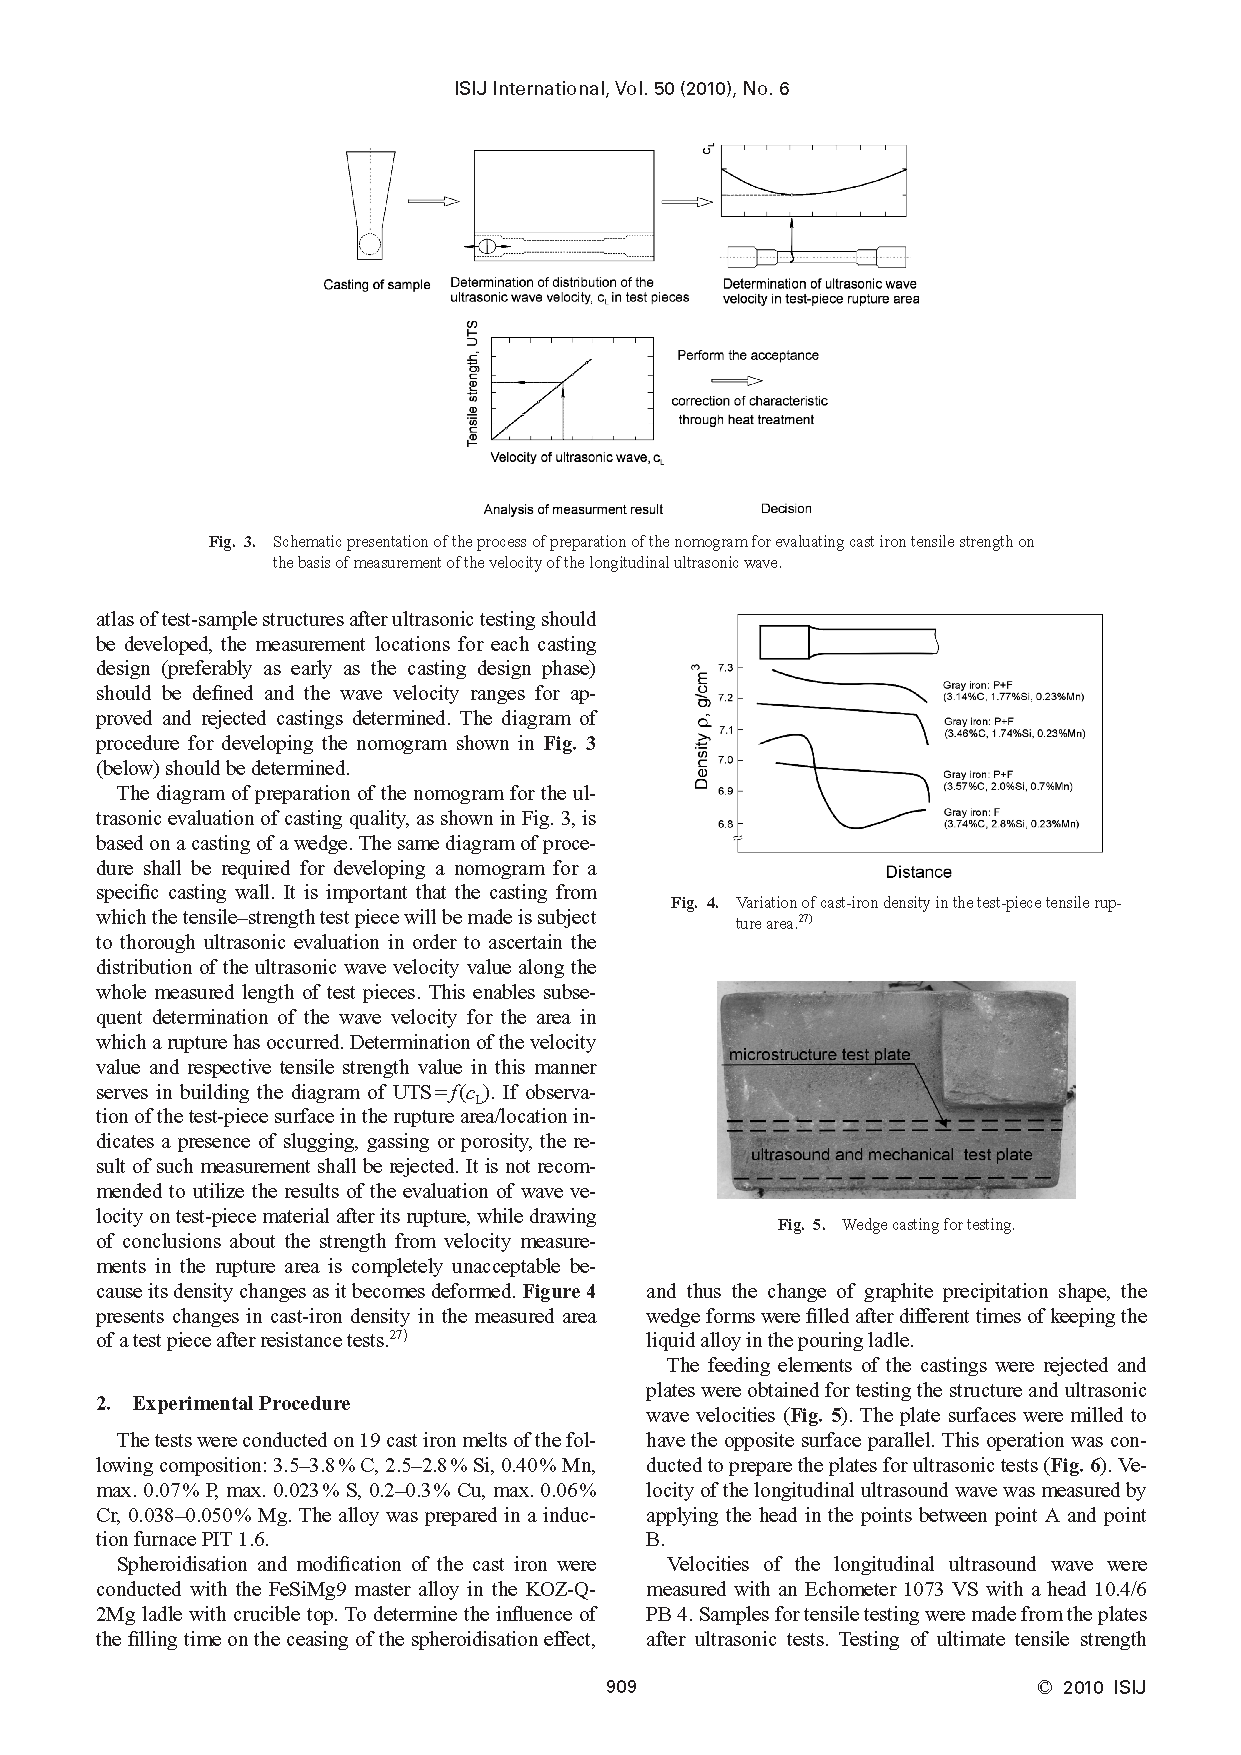 Quality Control by Means of Ultrasonic in the Production of Ductile Iron(图4)